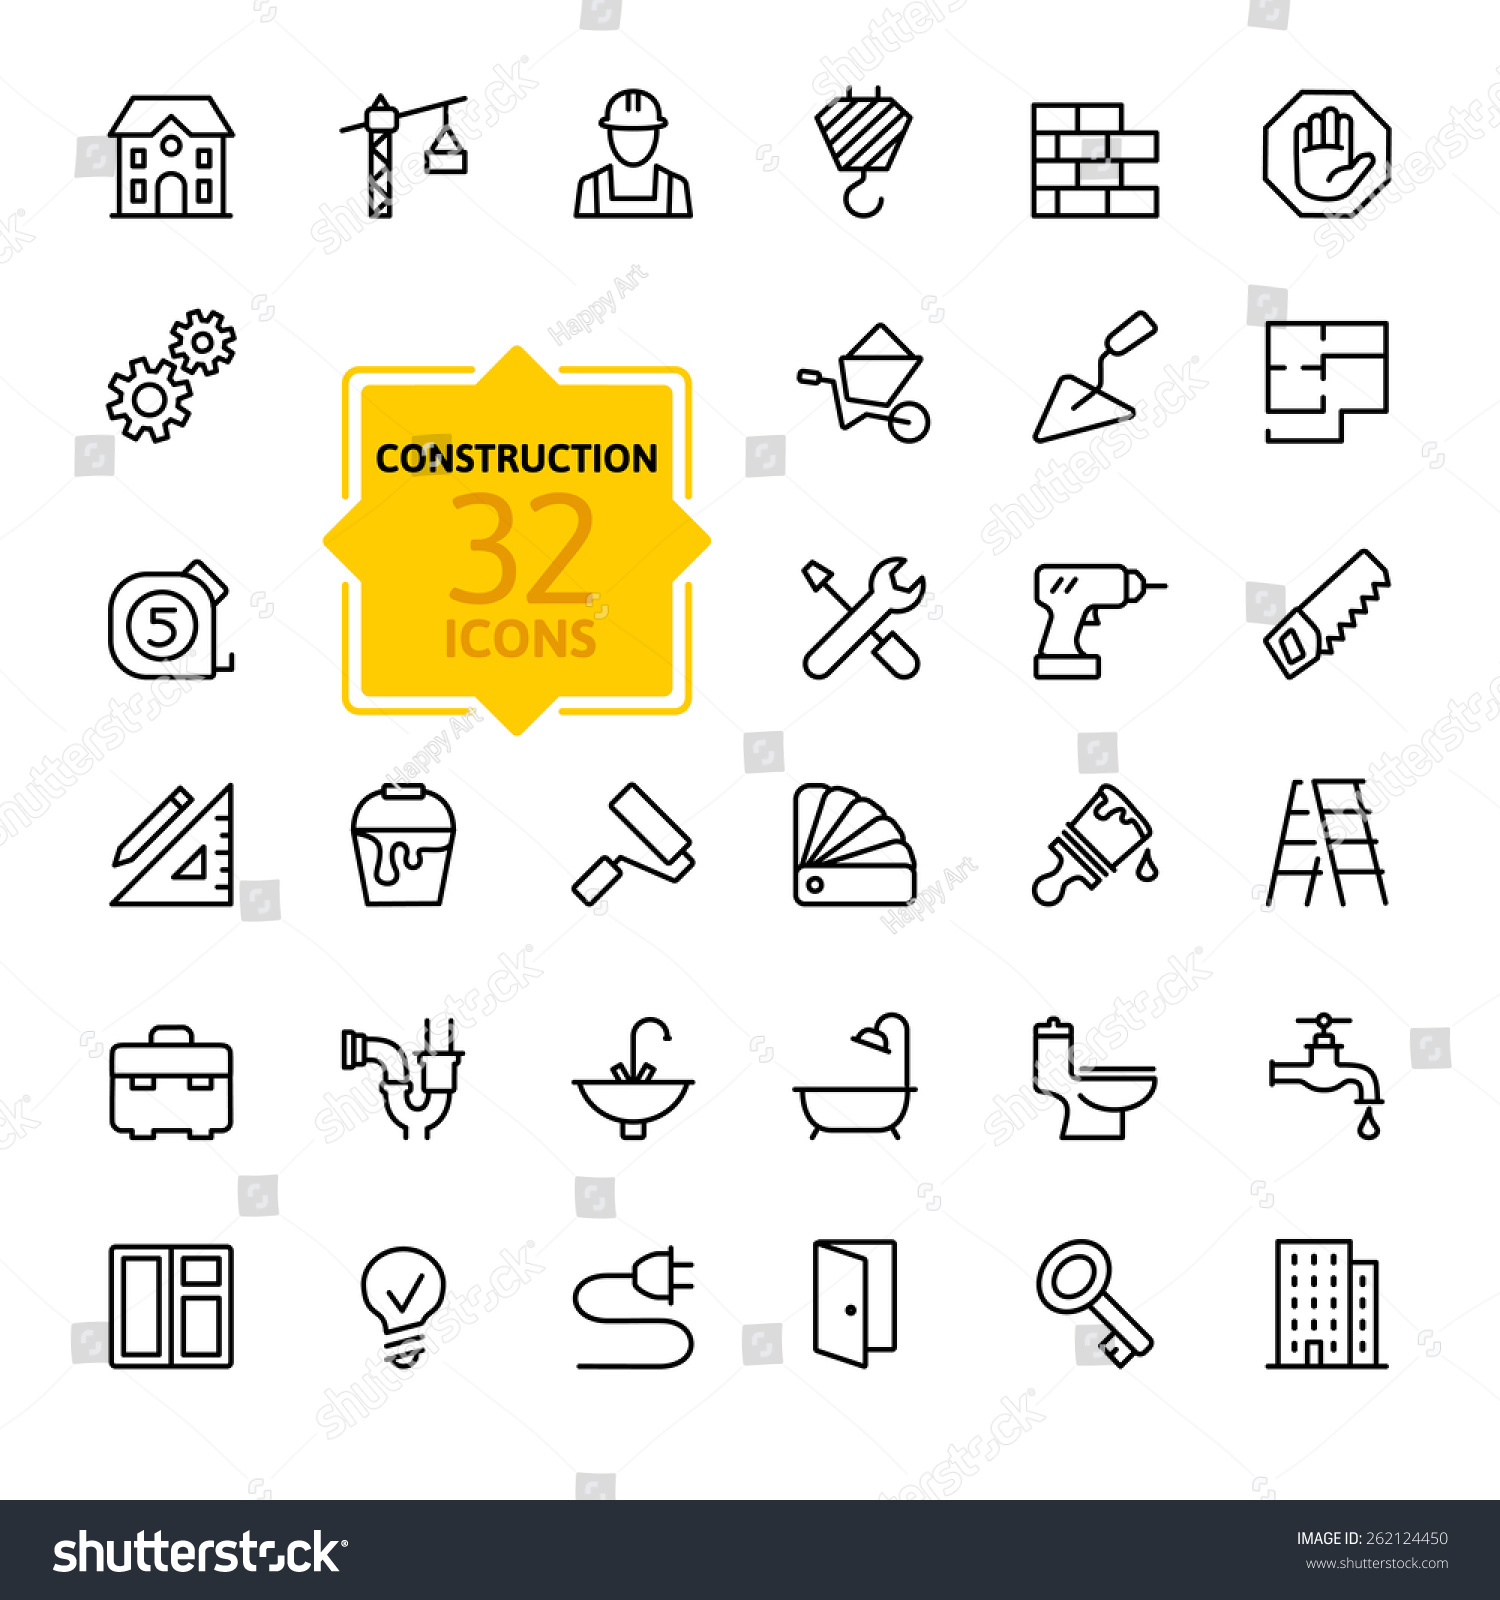 Outline web icons set - building, construction and home repair tools 